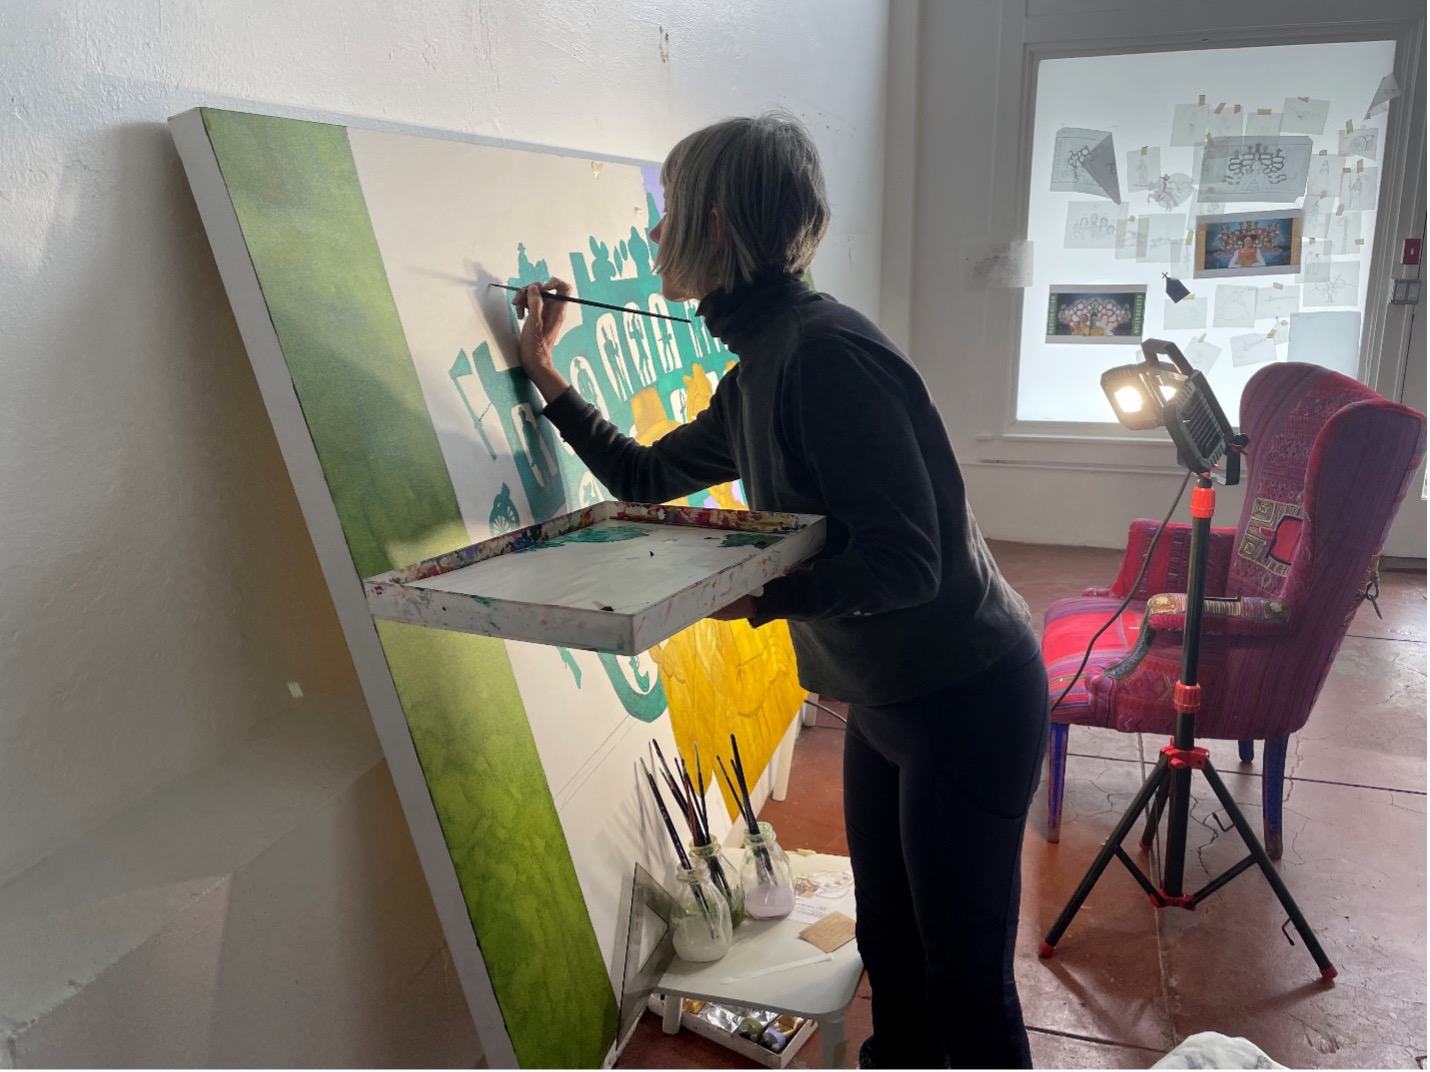 Artist Kathy Sosa paints the second panel of the 5 panel mural on large canvas in studio. 